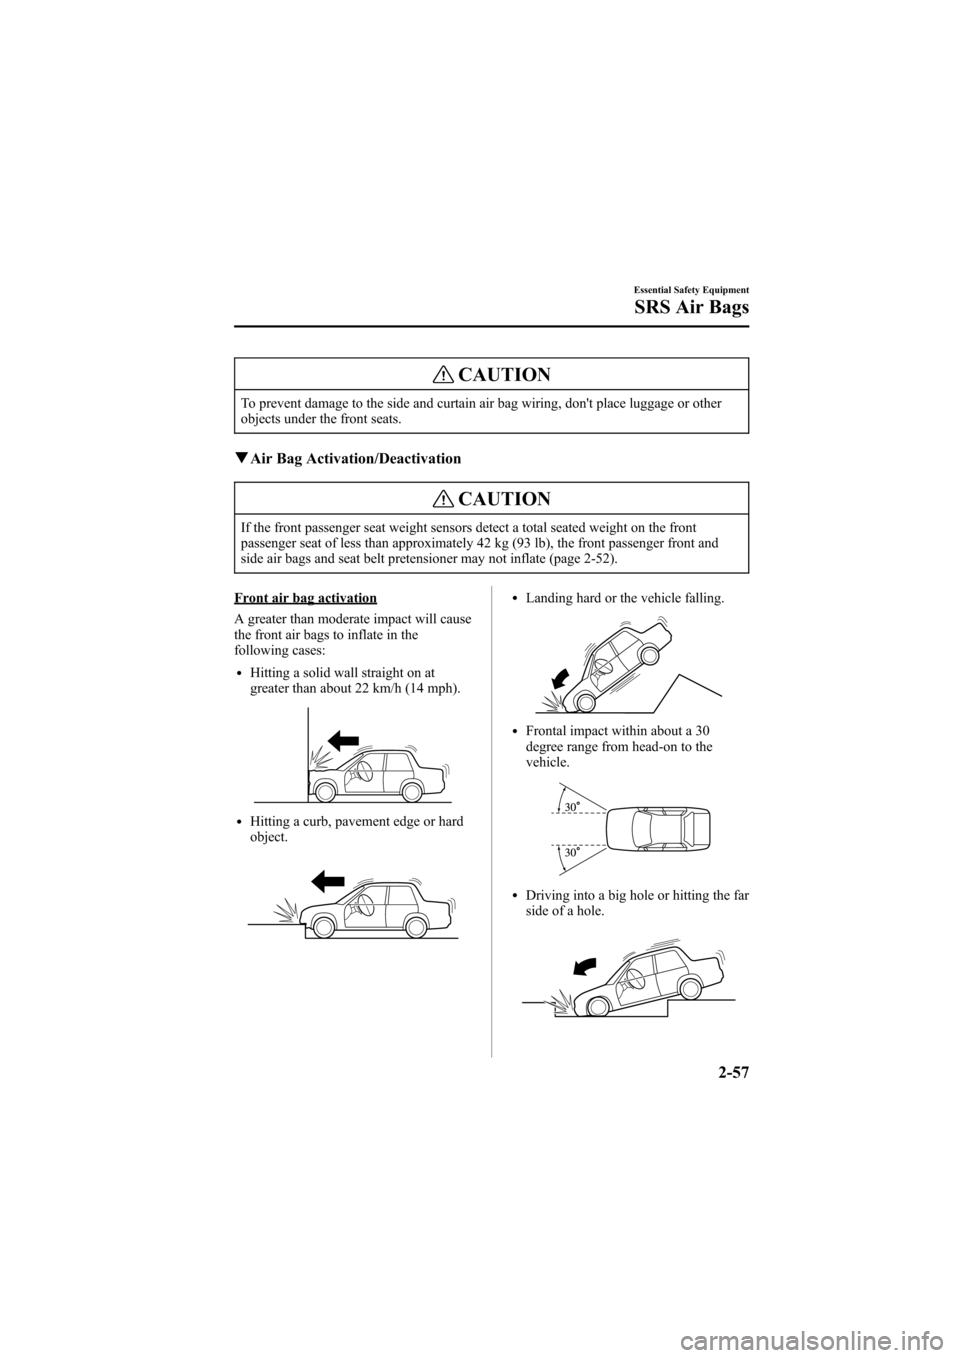 MAZDA MODEL 6 2005  Owners Manual (in English) Black plate (71,1)
CAUTION
To prevent damage to the side and curtain air bag wiring, dont place luggage or other
objects under the front seats.
qAir Bag Activation/Deactivation
CAUTION
If the front p